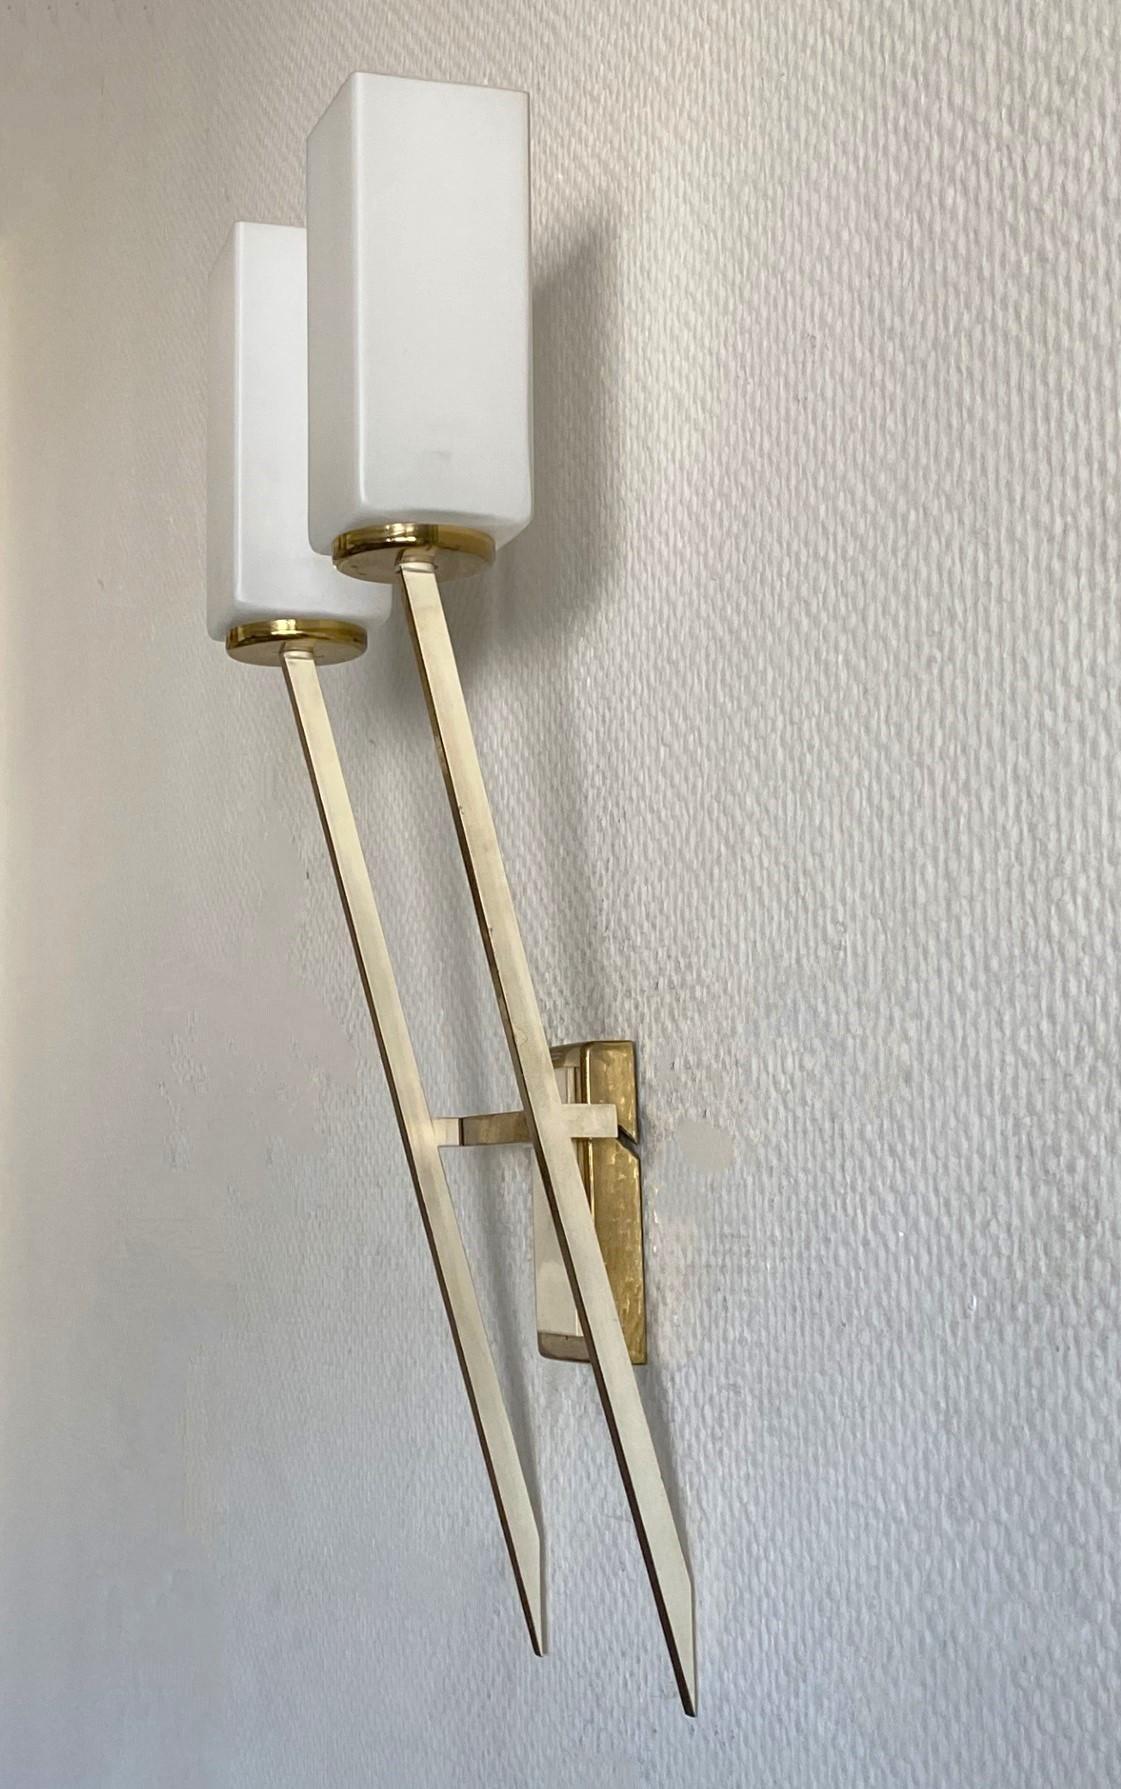 Pair of Tall Stilnovo Glass Brass Two-Arm Wall Sconces, Italy, 1960s In Good Condition For Sale In Frankfurt am Main, DE